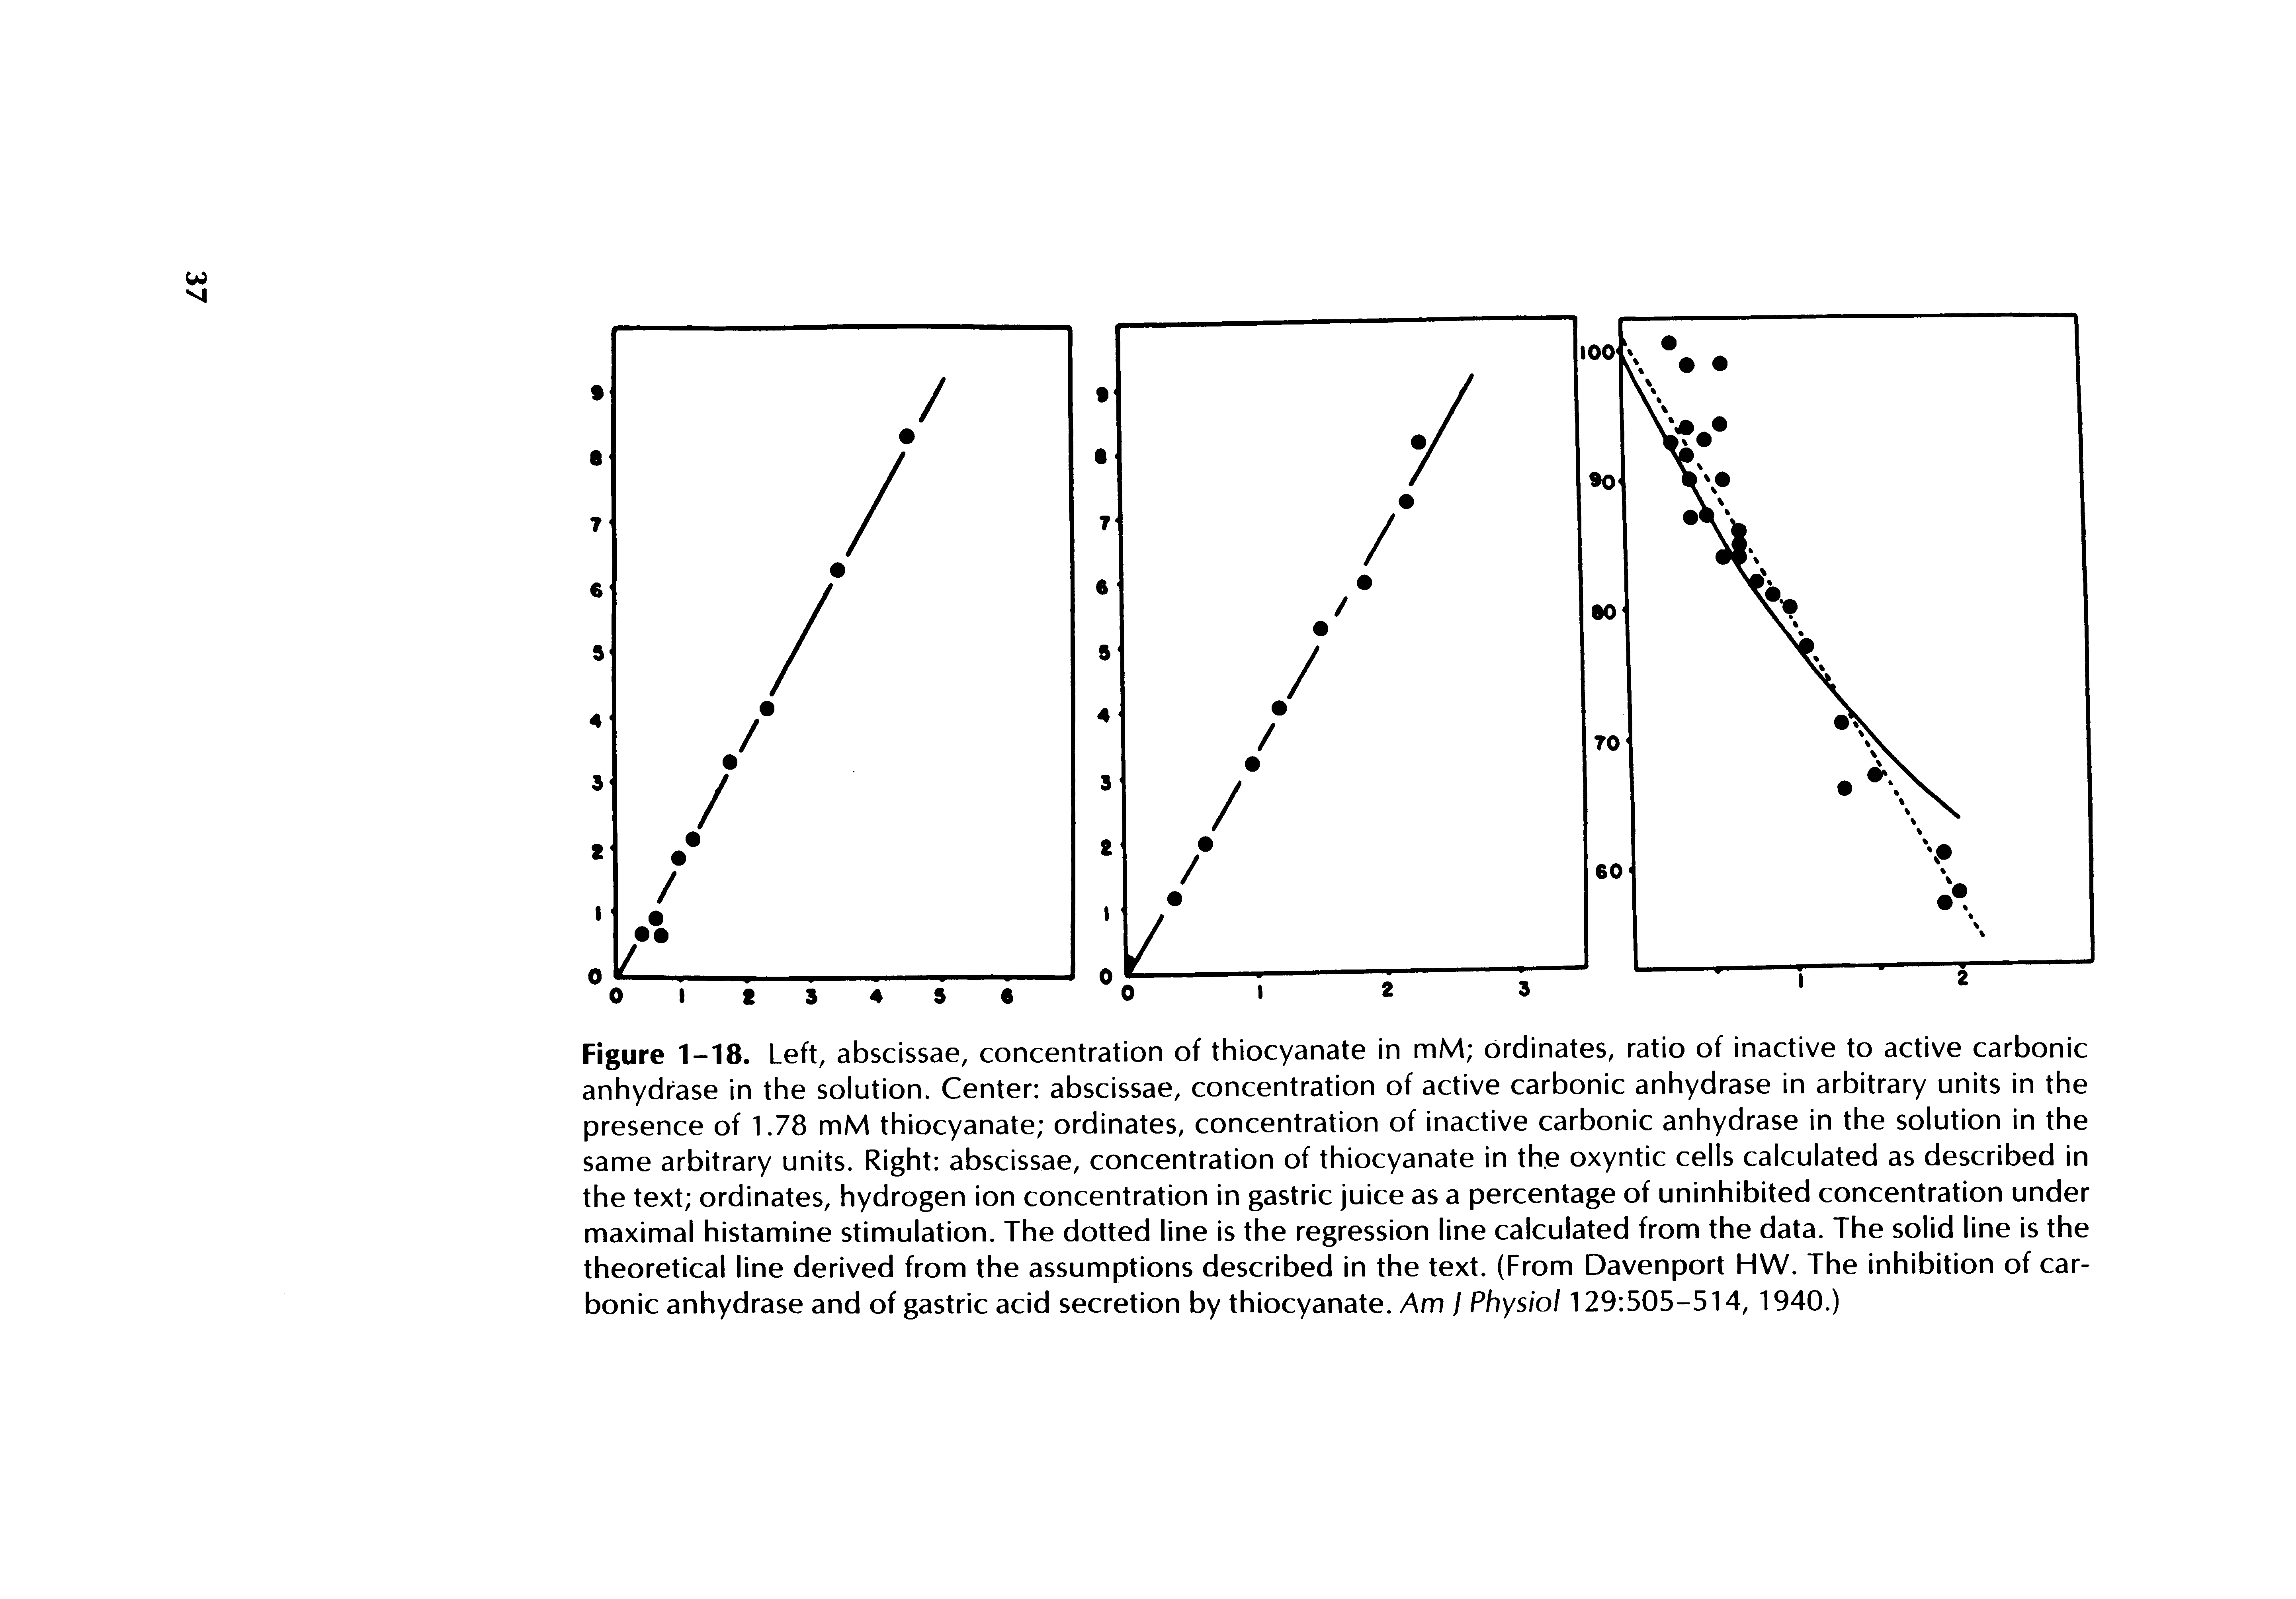 Figure 1-18. Left, abscissae, concentration of thiocyanate in mM ordinates, ratio of inactive to active carbonic anhydfase in the solution. Center abscissae, concentration of active carbonic anhydrase in arbitrary units in the presence of 1.78 mM thiocyanate ordinates, concentration of inactive carbonic anhydrase in the solution in the same arbitrary units. Right abscissae, concentration of thiocyanate in the oxyntic cells calculated as described in the text ordinates, hydrogen ion concentration in gastric juice as a percentage of uninhibited concentration under maximal histamine stimulation. The dotted line is the regression line calculated from the data. The solid line is the theoretical line derived from the assumptions described in the text. (From Davenport HW. The inhibition of carbonic anhydrase and of gastric acid secretion by thiocyanate. Am / Physiol 129 505-514, 1940.)...